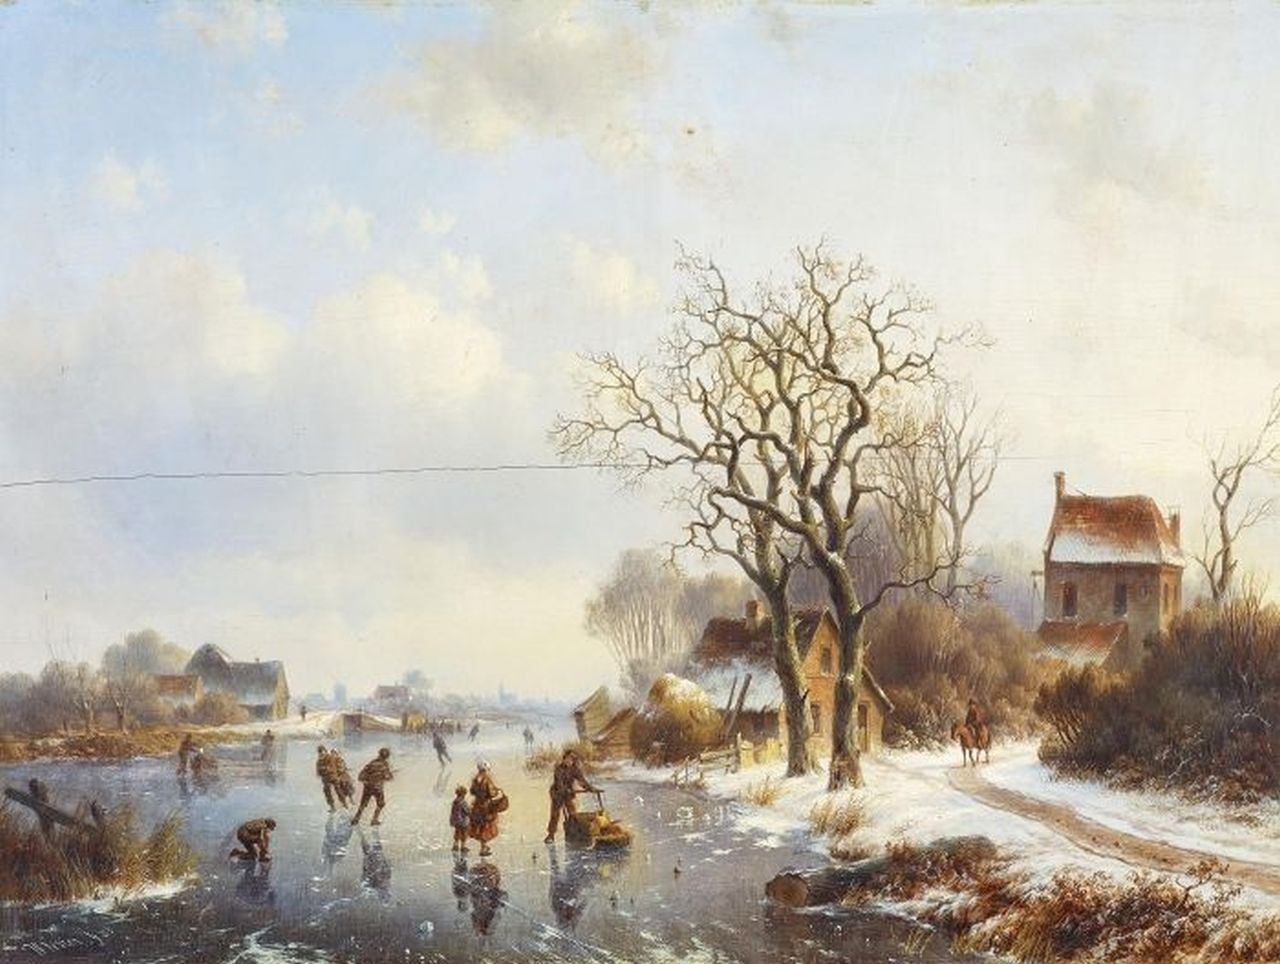 Vester W.  | Willem Vester | Paintings offered for sale | Skating fun on a frozen river, oil on panel 53.5 x 71.9 cm, signed l.l. and dated '53